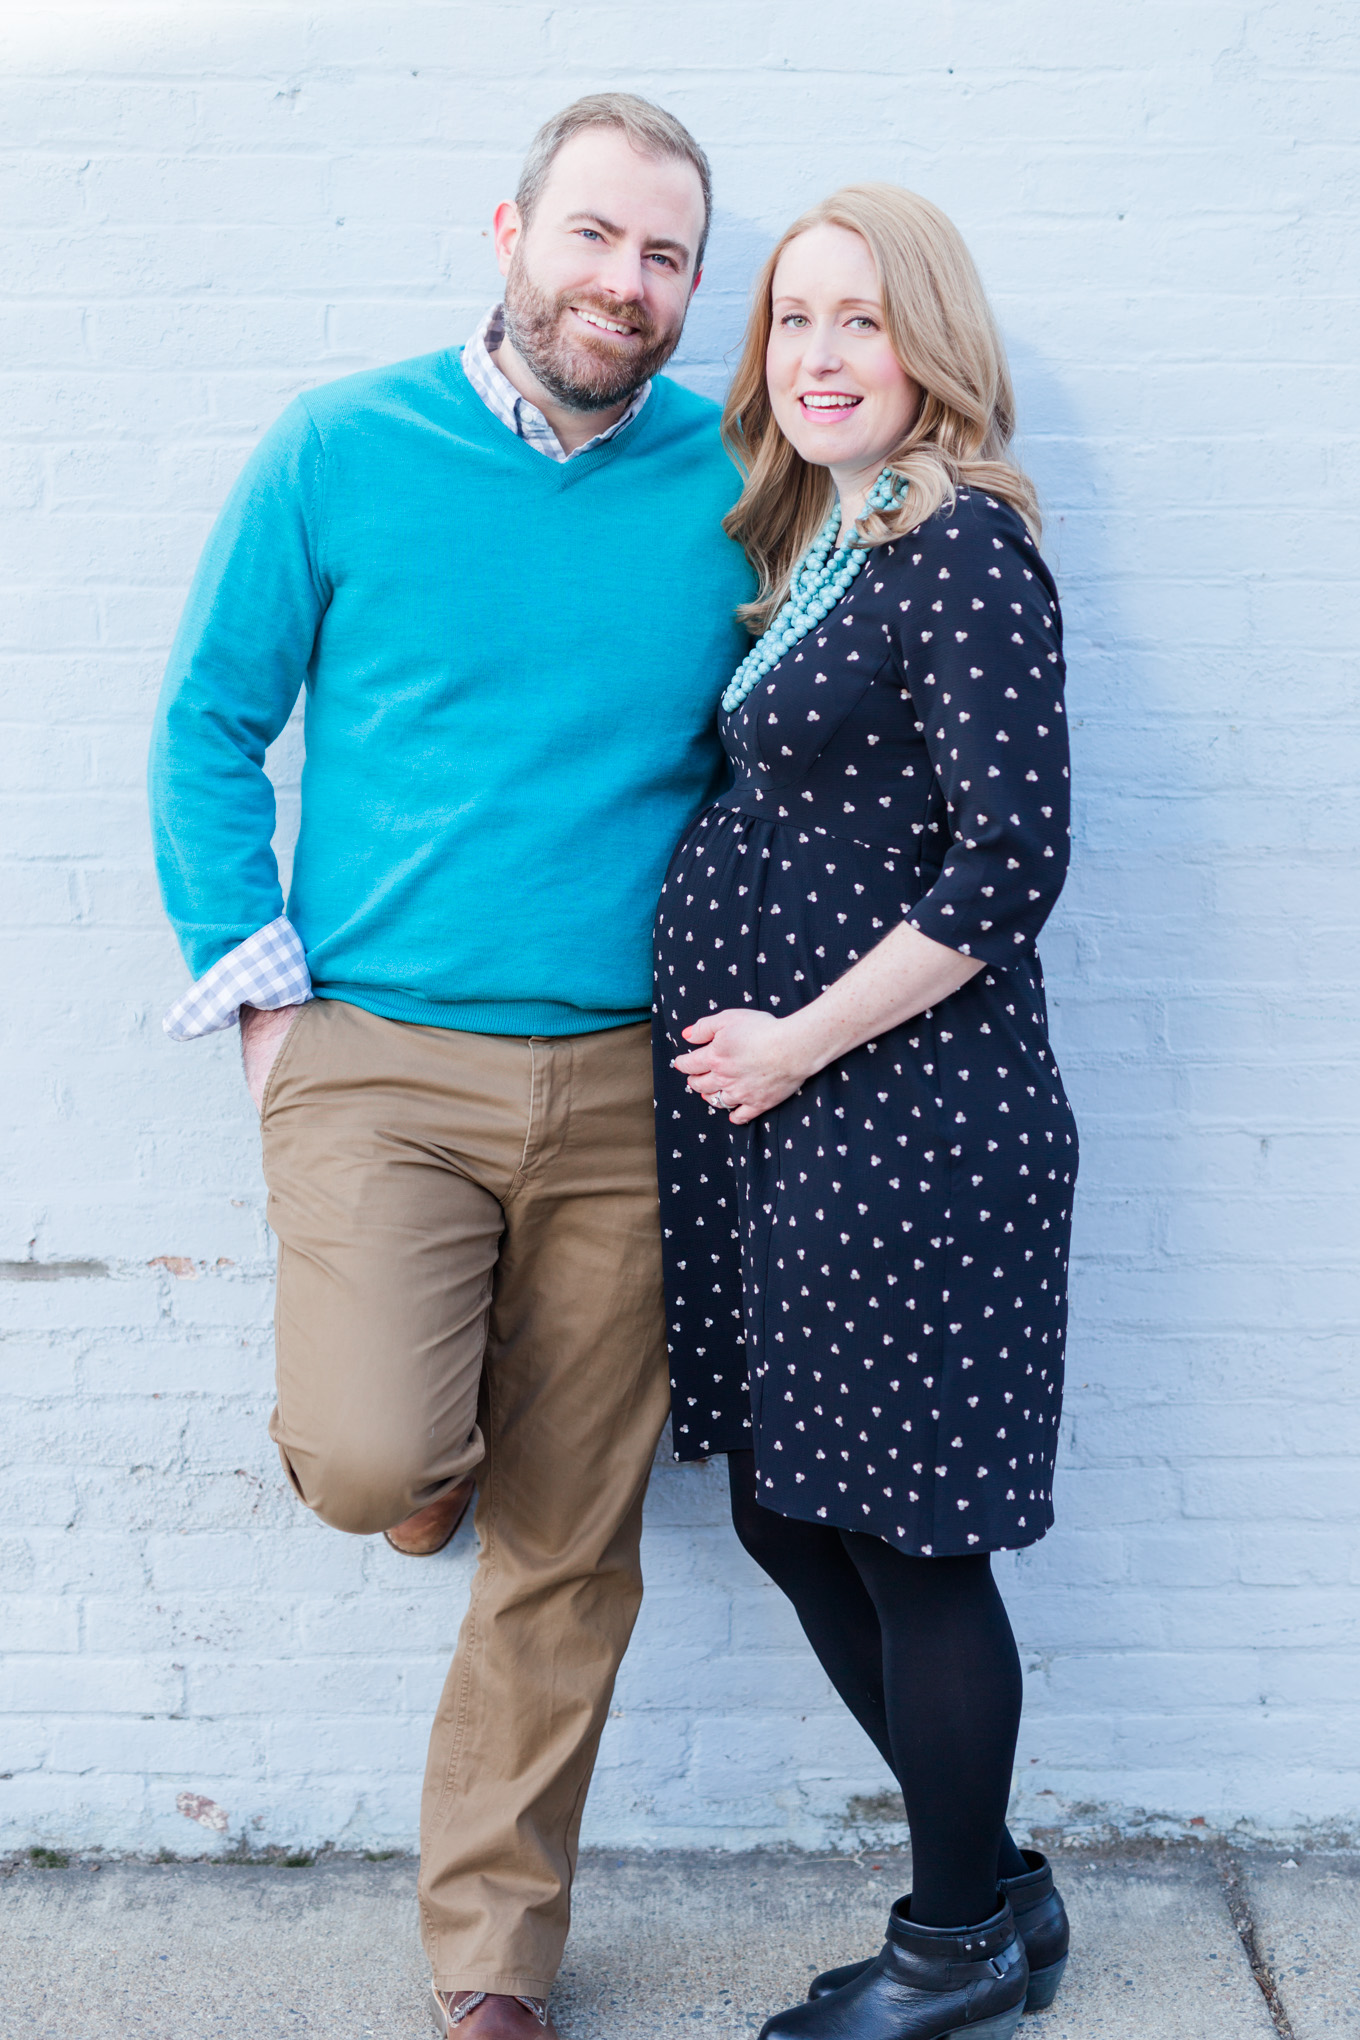 photo shoot style ideas, photo shoot style, photo shoot fashion, style ideas, style guide, photo shoot style guide, maternity photos, expecting couple, Alexandria, Old Town, 